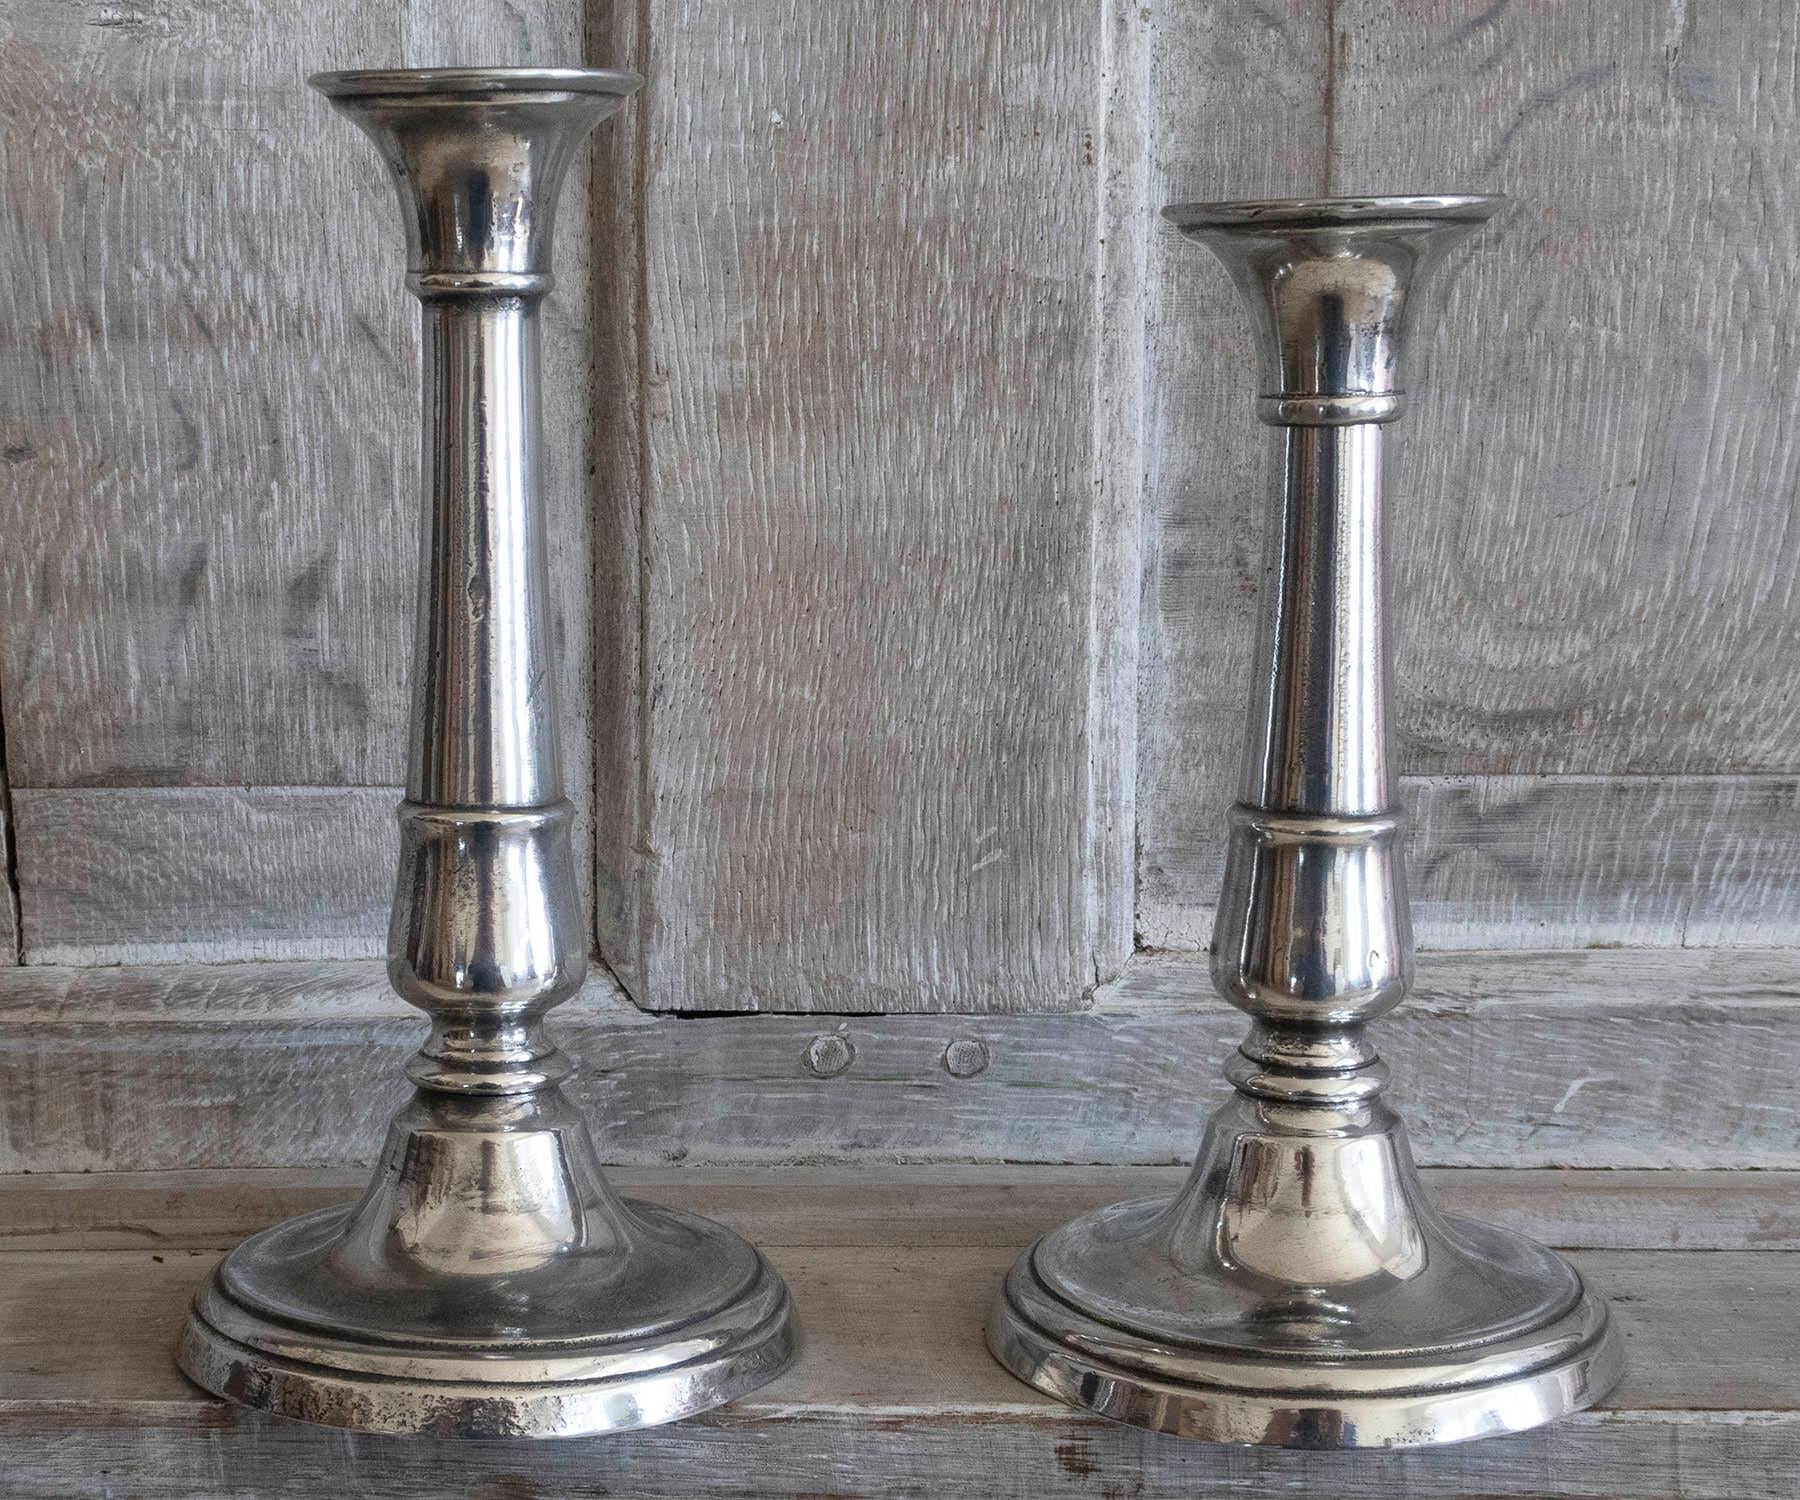 Nice near pair of Georgian round base candlesticks. One is slightly taller

English pewter. Probably London maker.

Good condition. 

The measurement given relates to the taller one.

